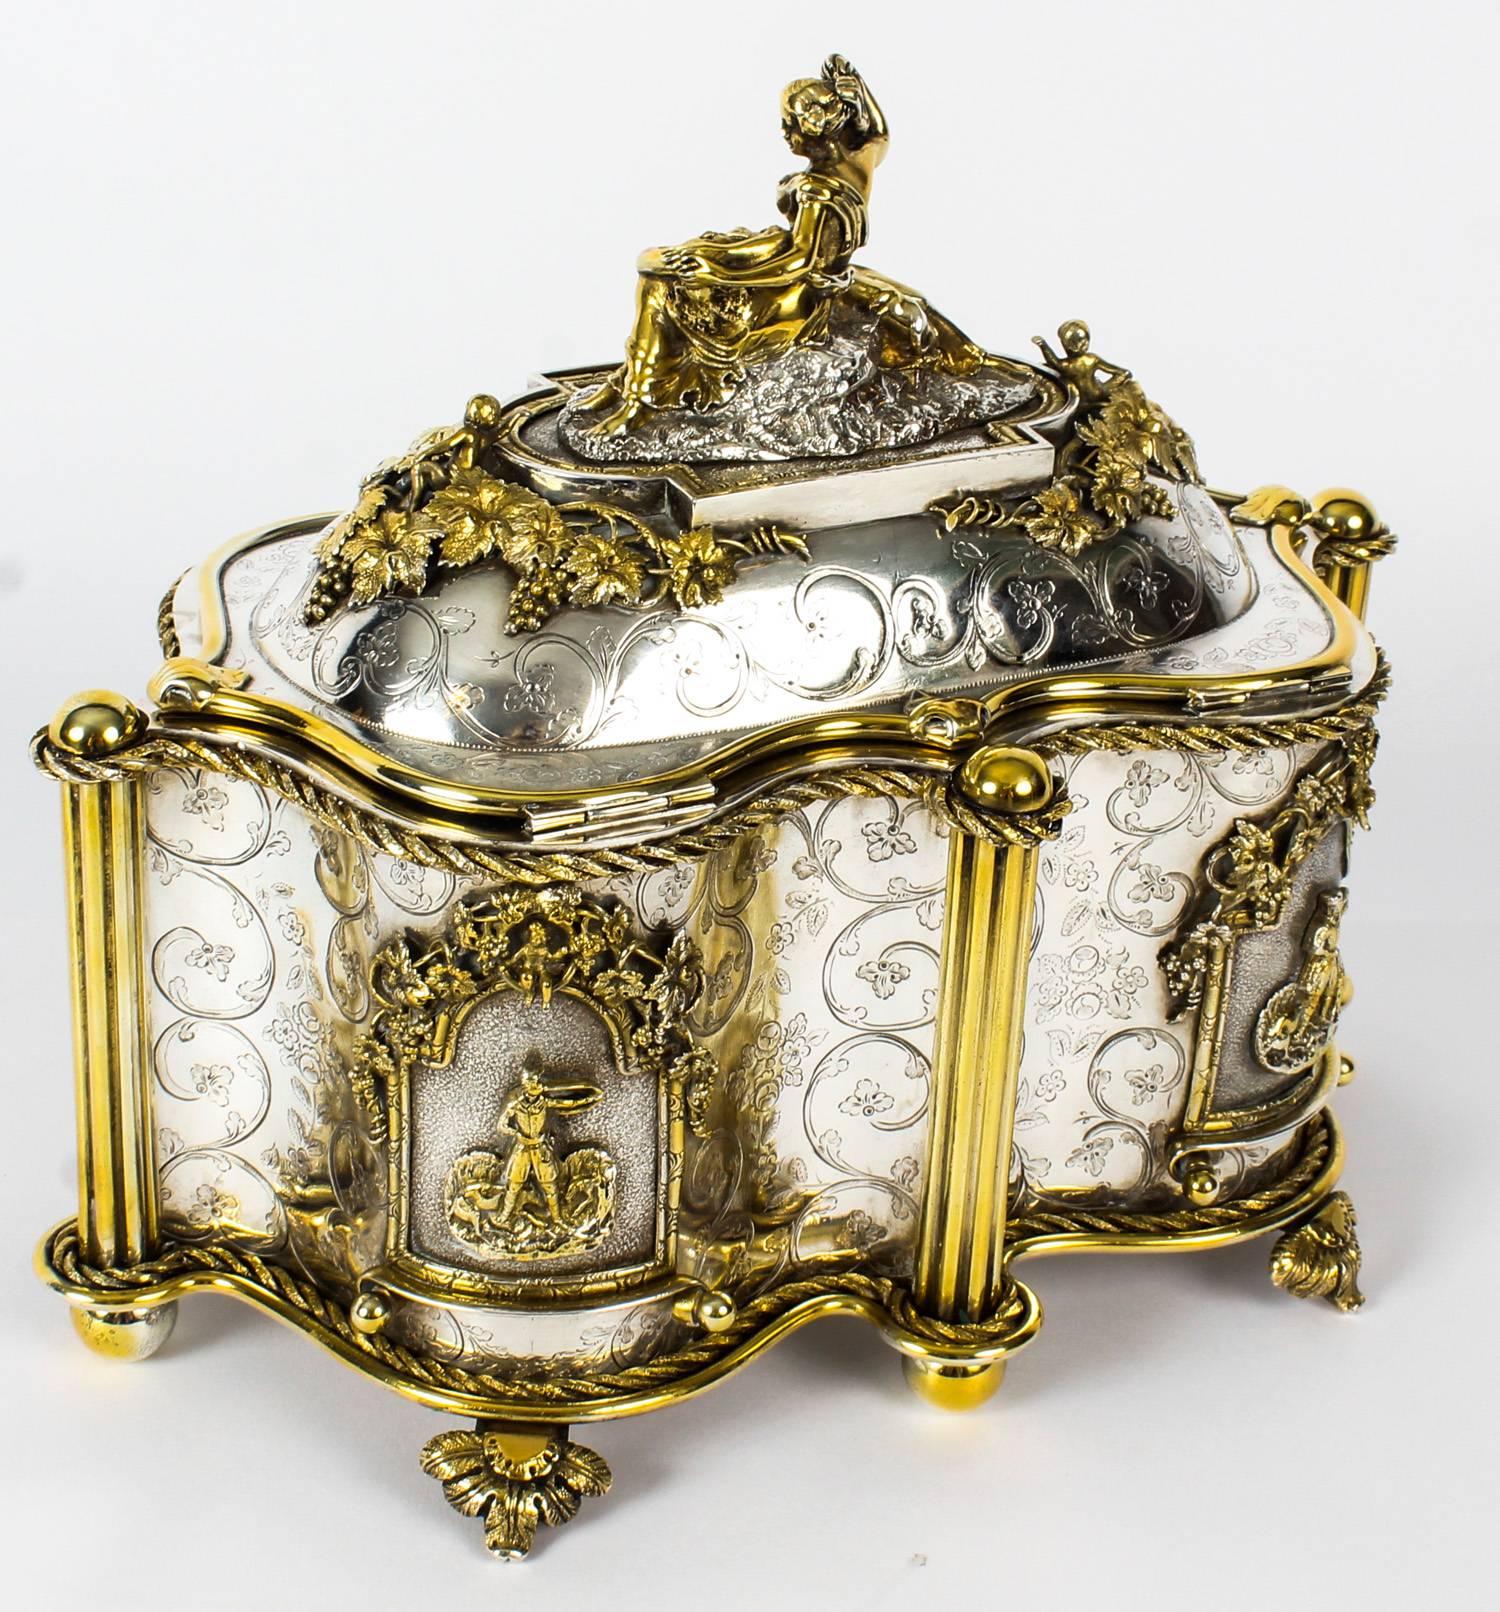 Antique Large French Gold and Silver Plated Oval Casket 19th Century 7